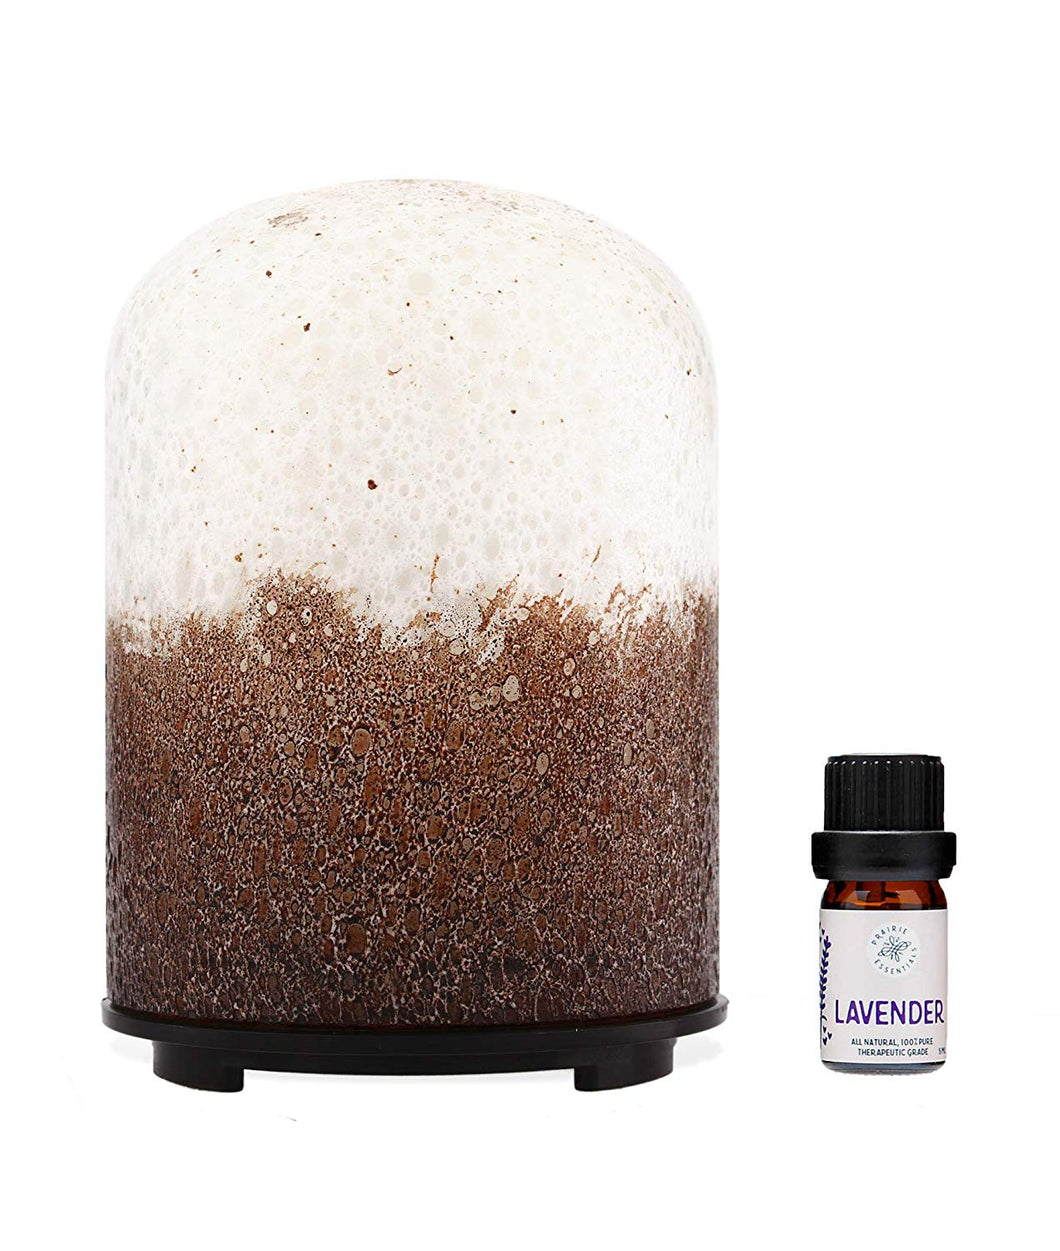 Hand Blown Brown & White Glass Cylinder Essential Oils Diffuser, 60ml, with 5ml Bottle of Lavender